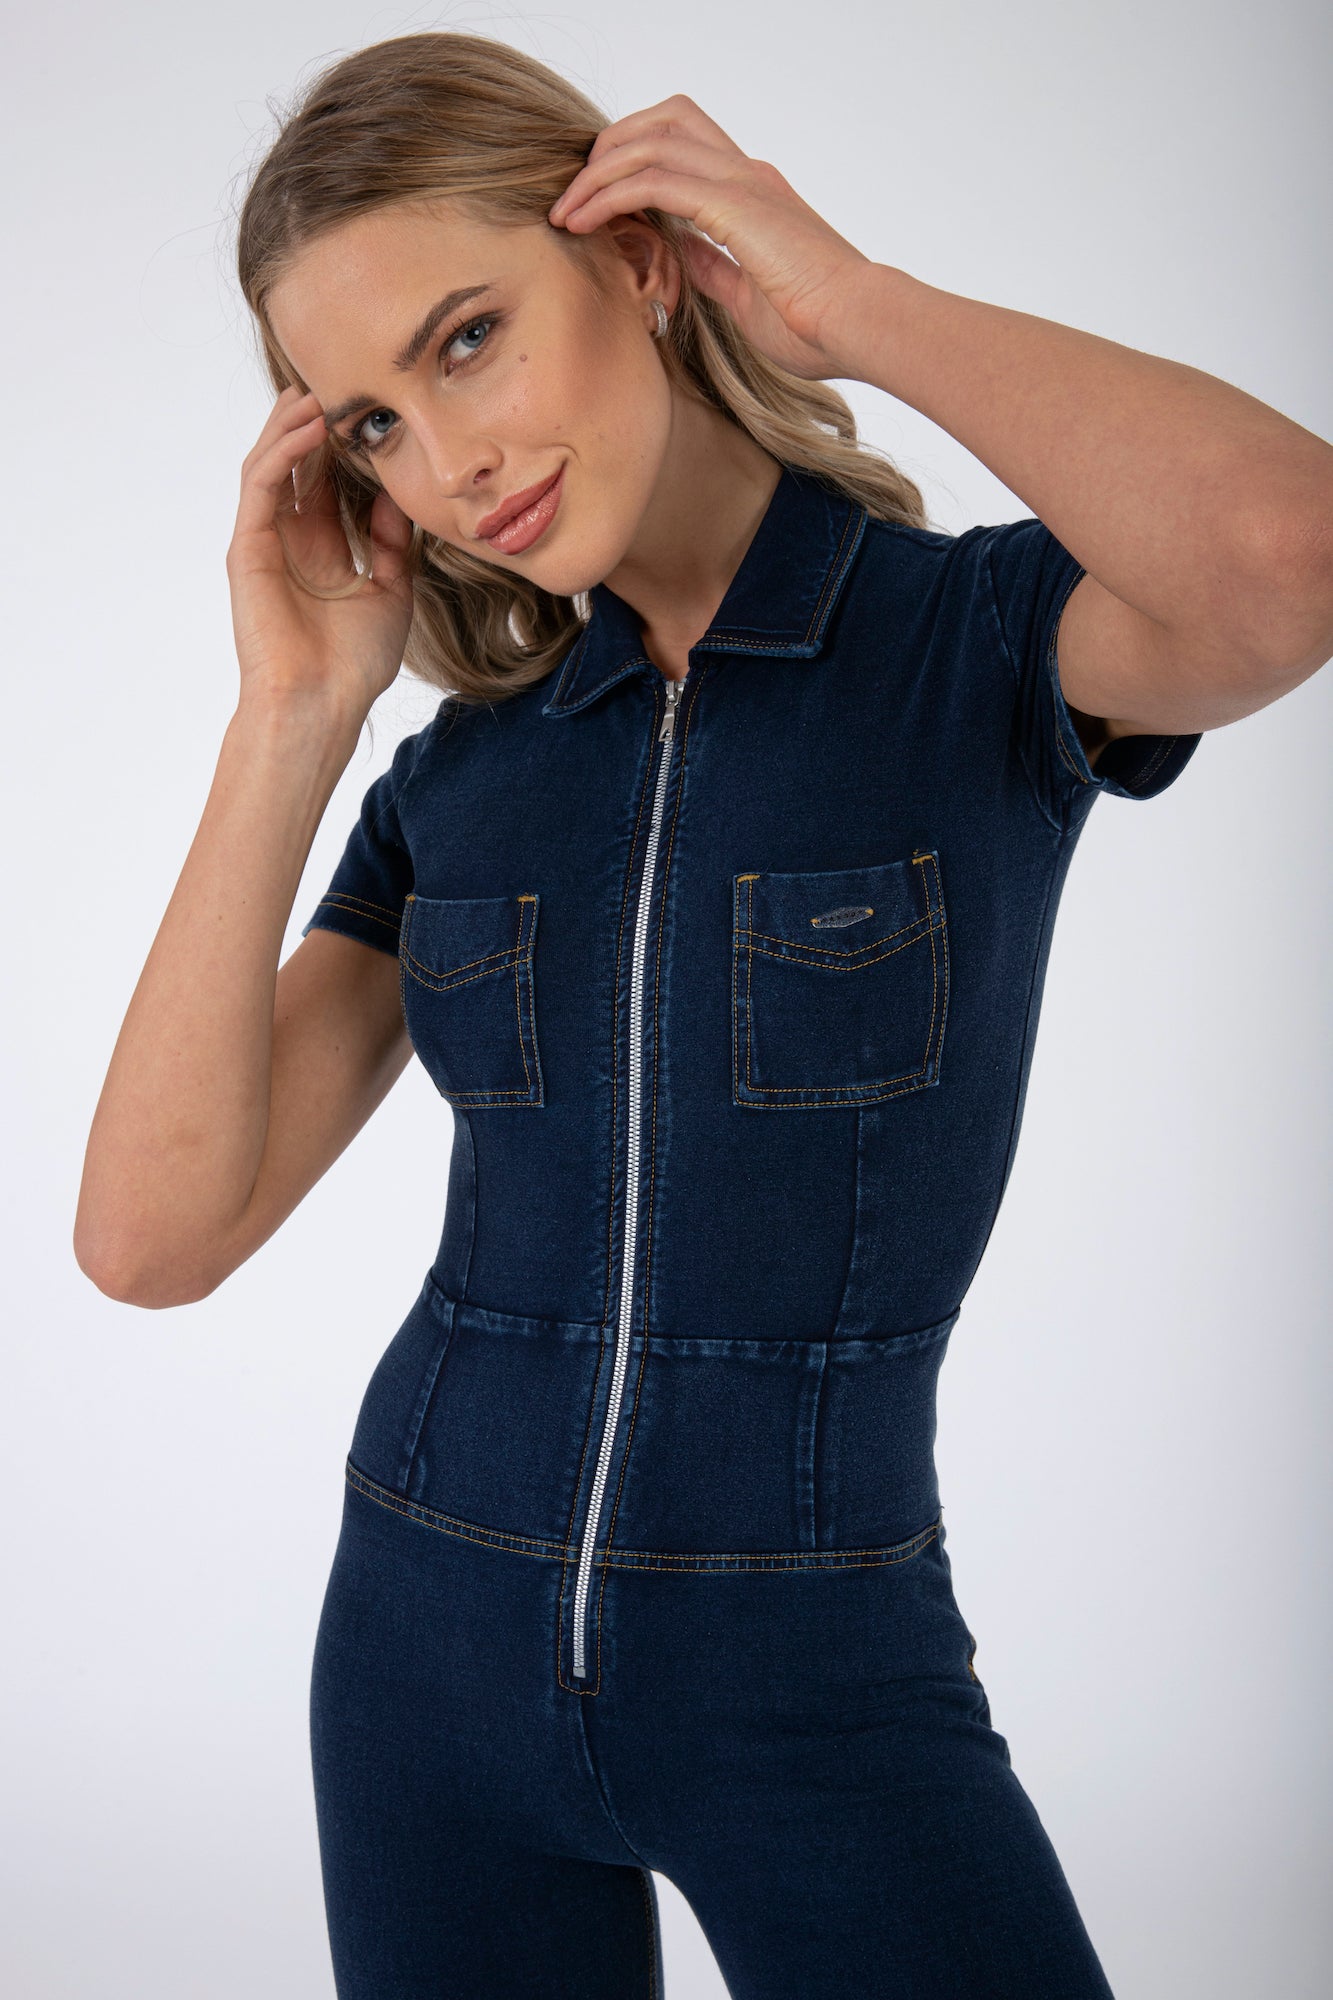 Womens Denim Jumpsuit Overalls Zip Front Collared all in one one